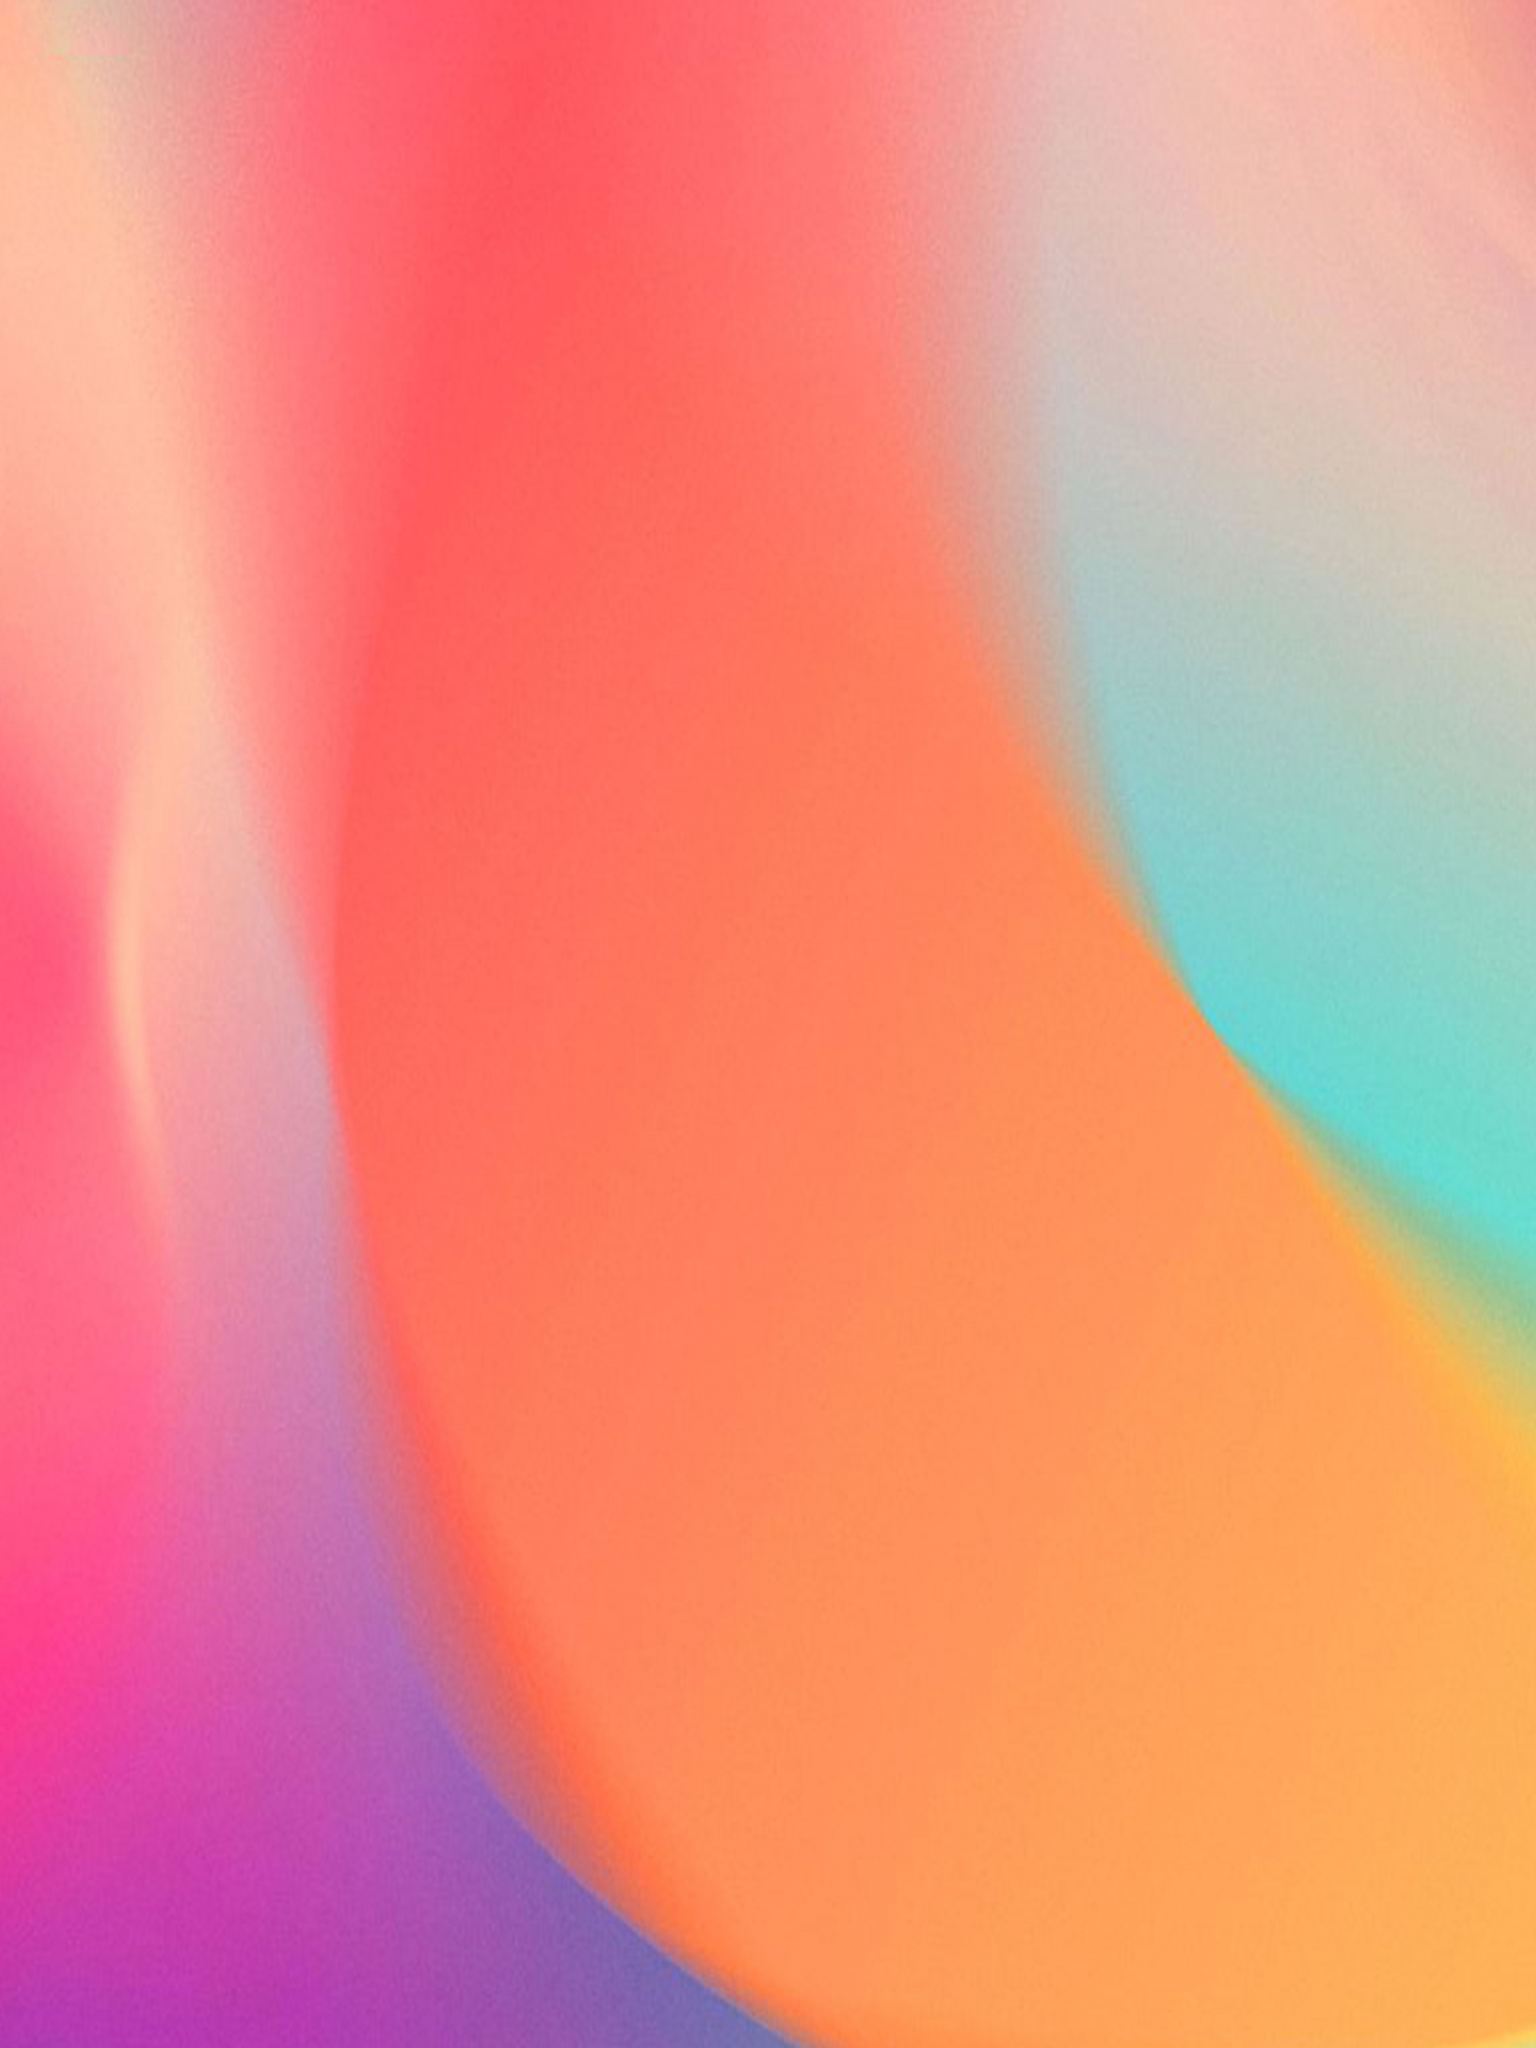 Vibrant Iphone Wallpapers